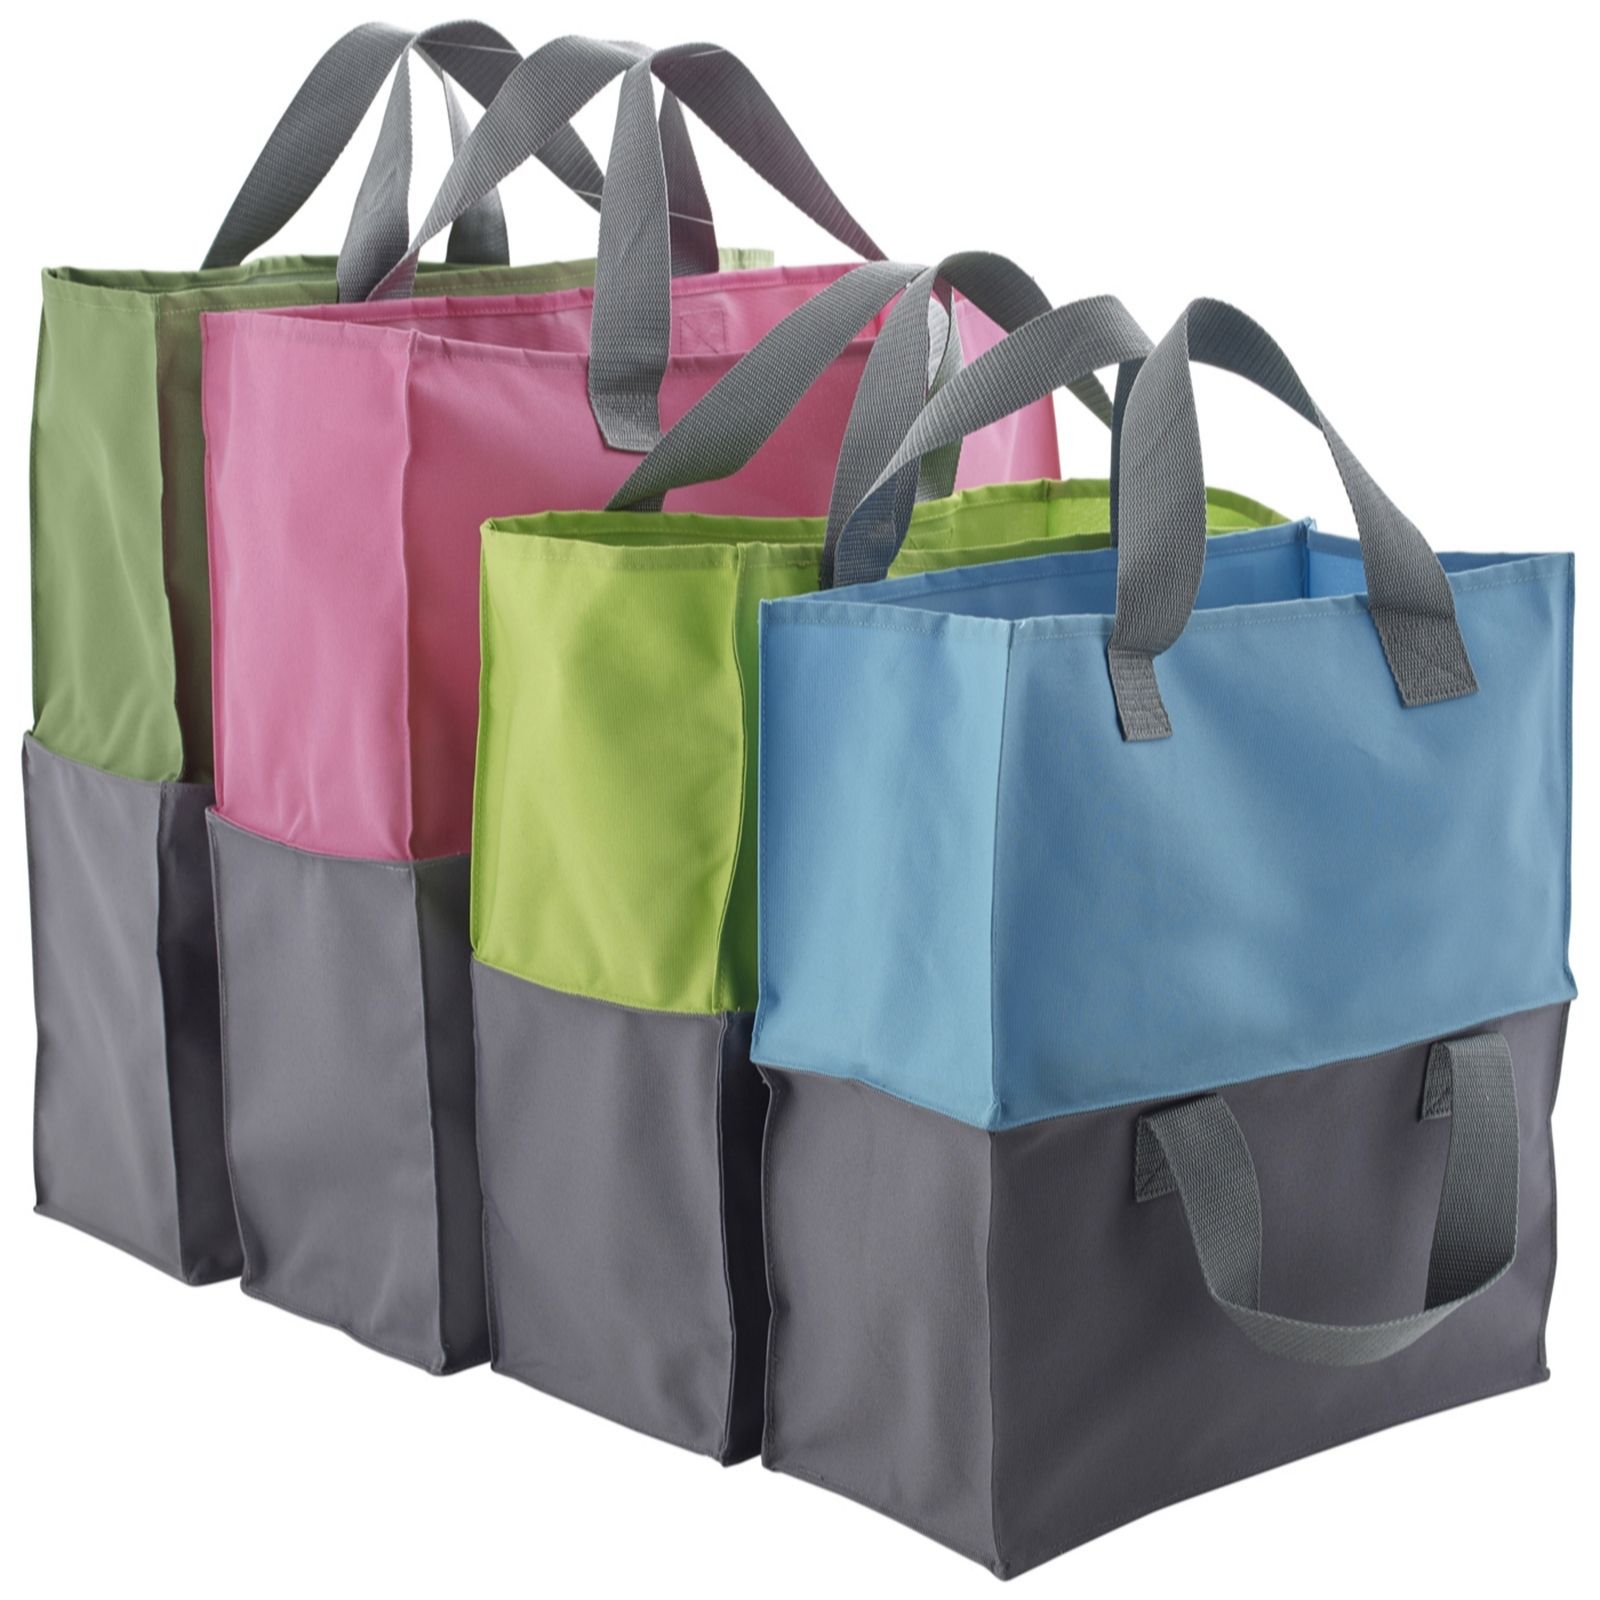 Lakeland 2 in 1 Trolley Bags - Page 1 - QVC UK